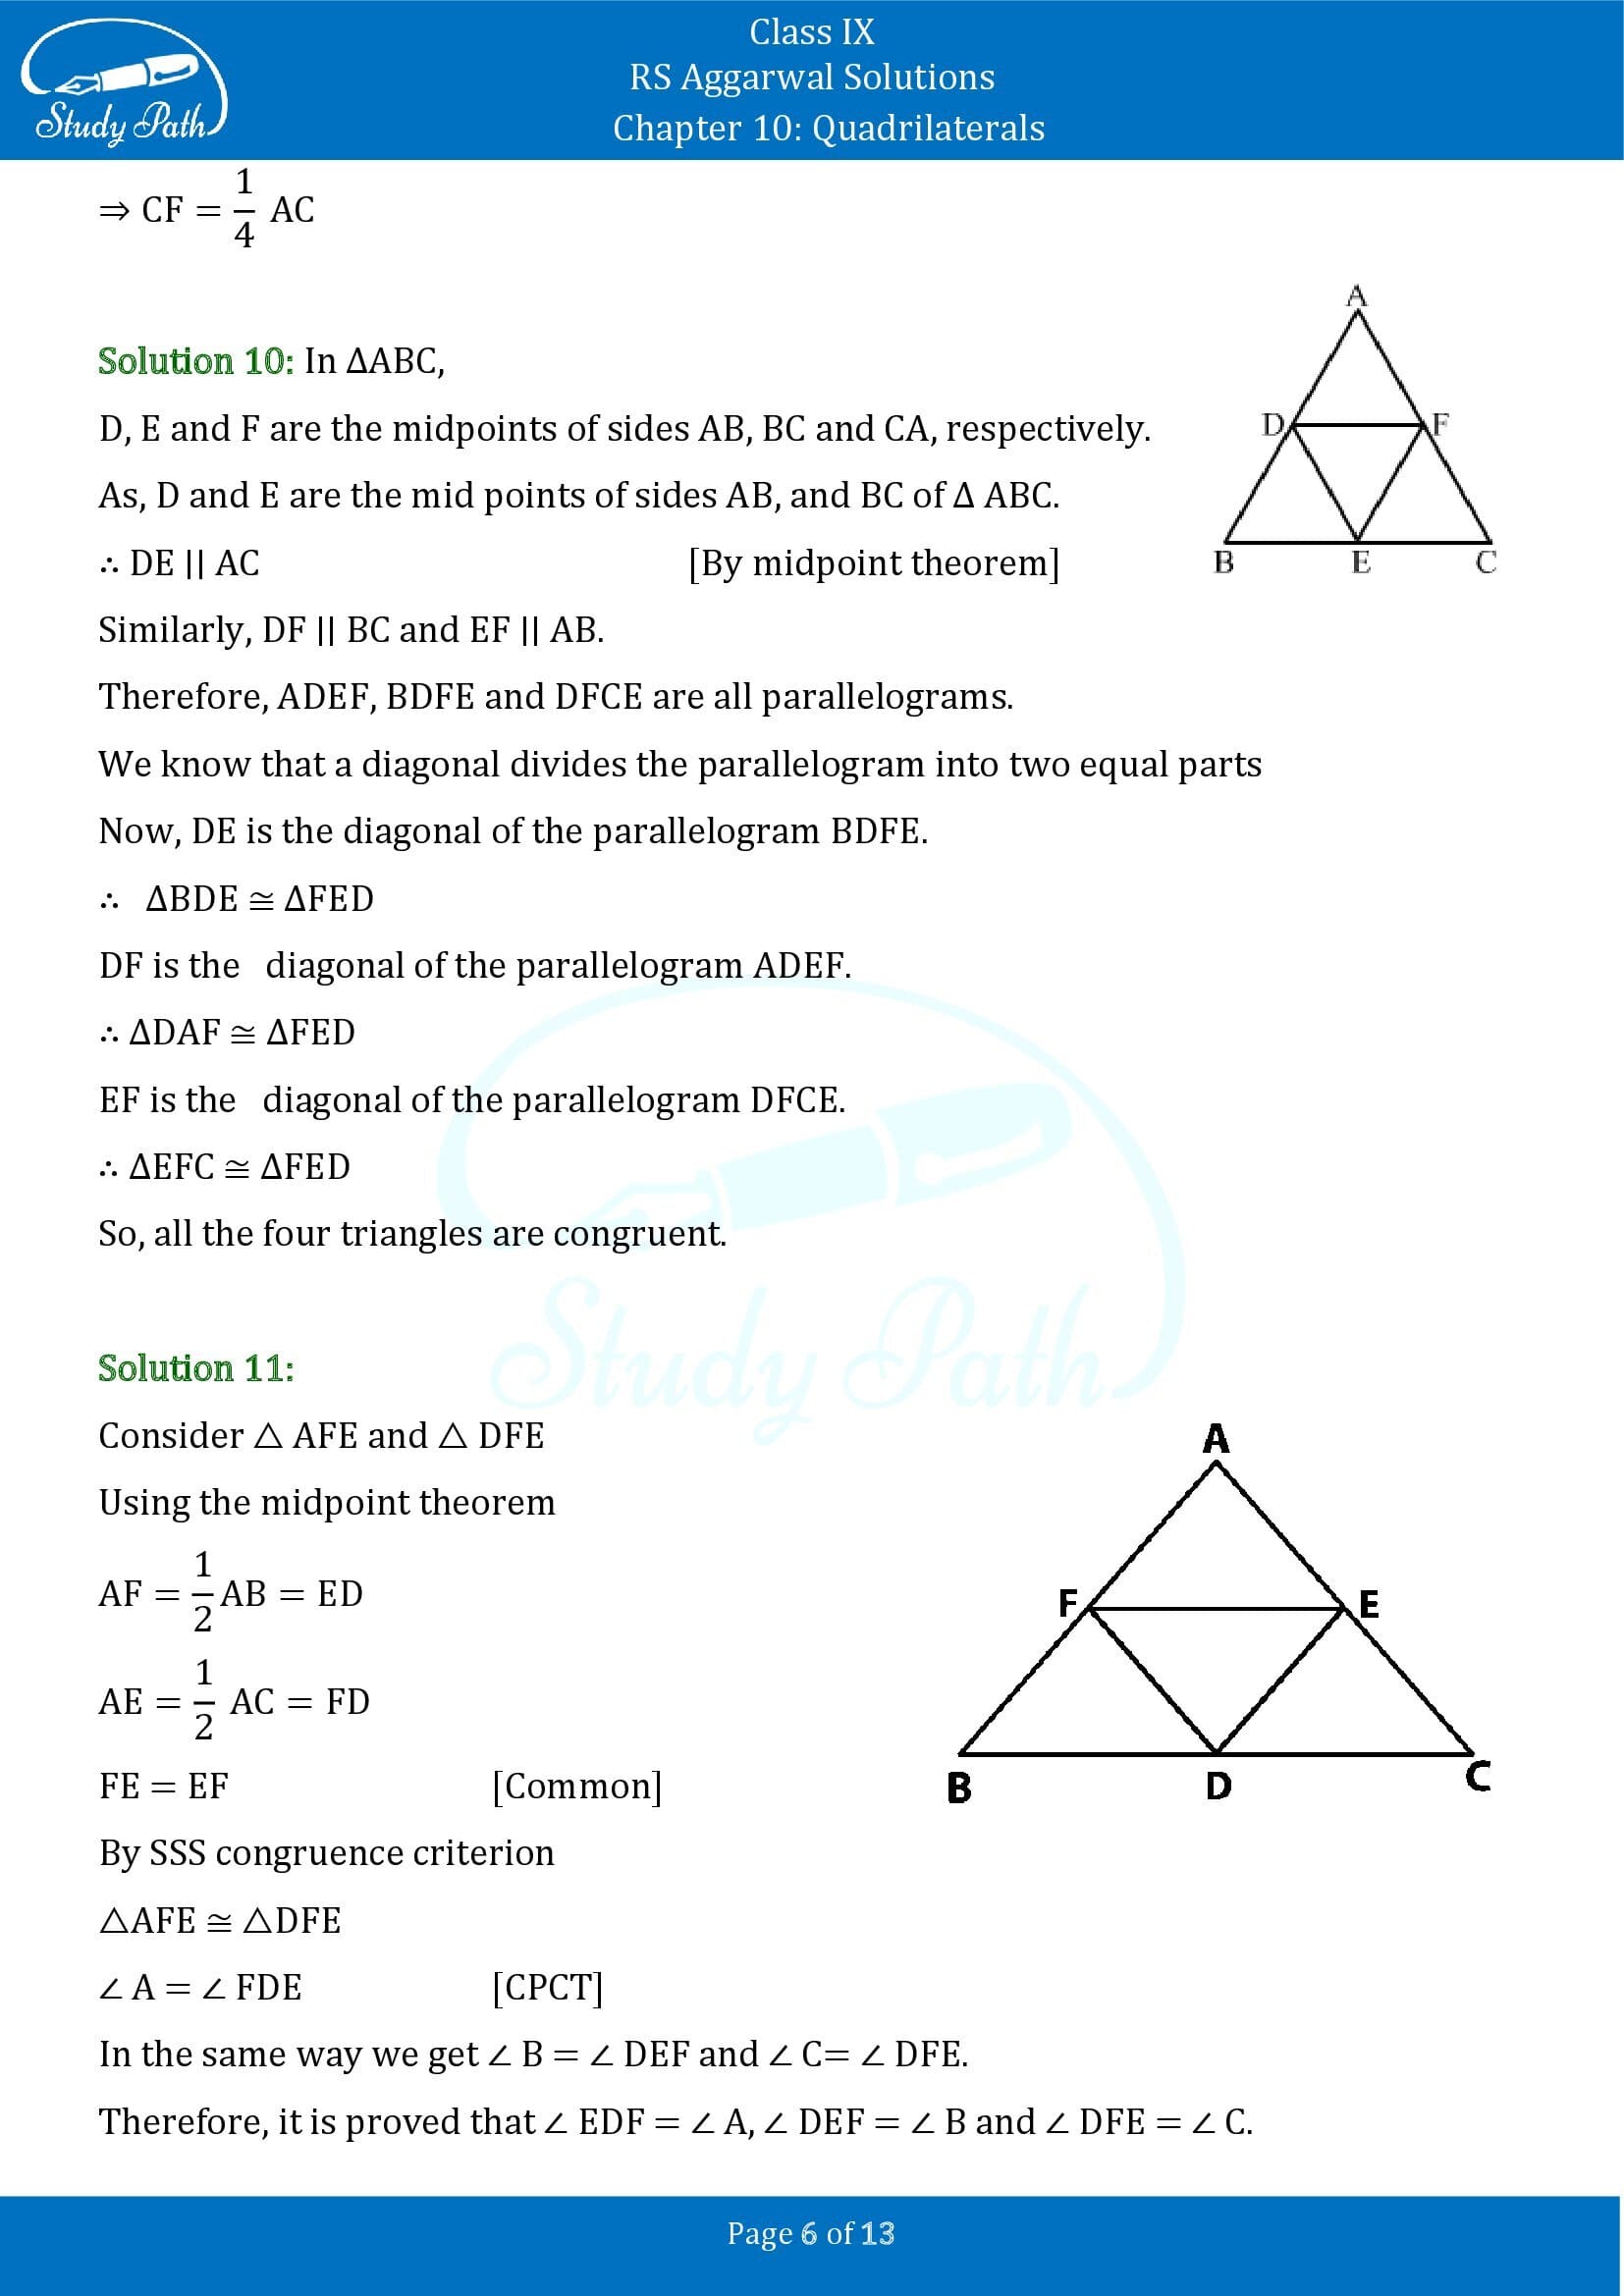 RS Aggarwal Solutions Class 9 Chapter 10 Quadrilaterals Exercise 10C 00006